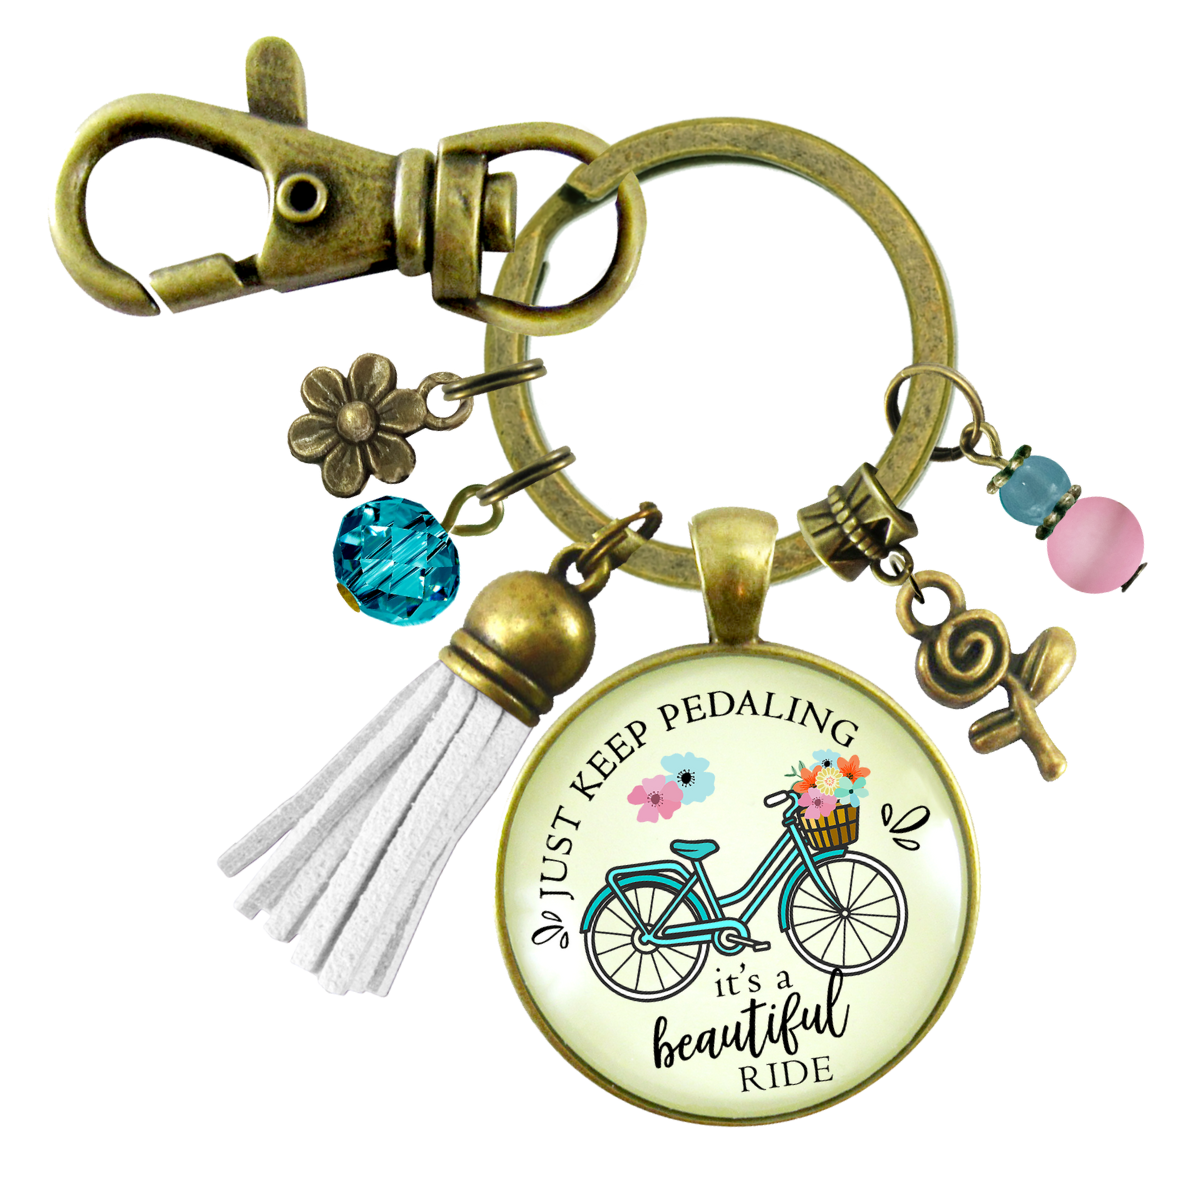 Just Keep Pedaling Bicycle Keychain Beautiful Ride Summer Boho Chic Colorful Tassel Flower Charms  Keychain - Women - Gutsy Goodness Handmade Jewelry